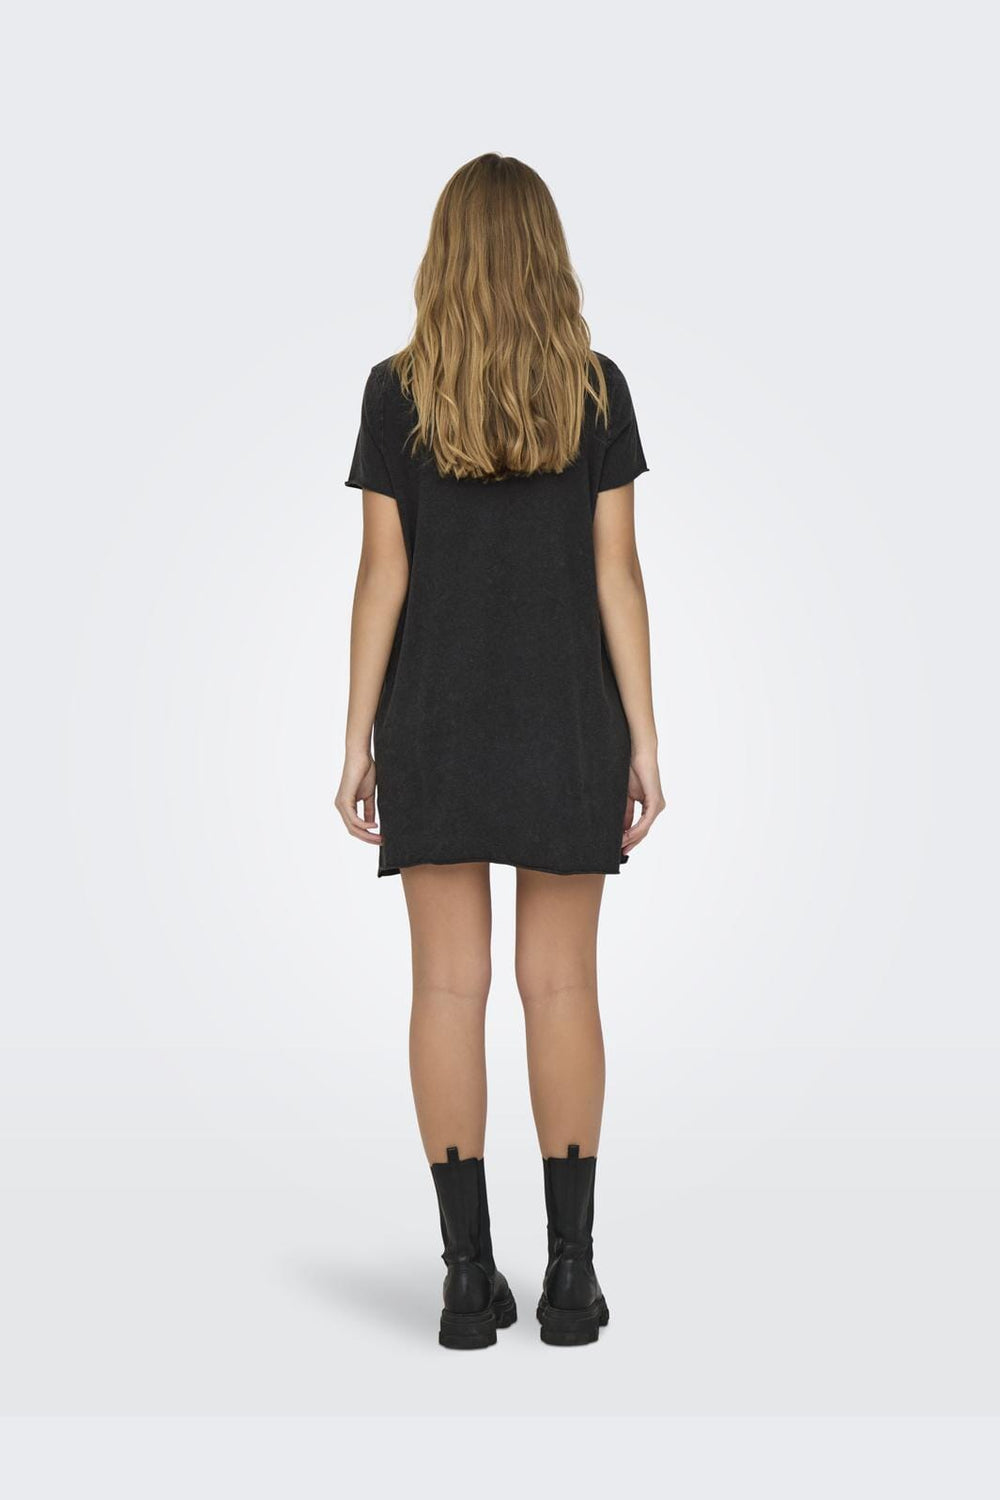 Only - Onllucy Life Dress S/S - 4493726 Black Born To Be Wild